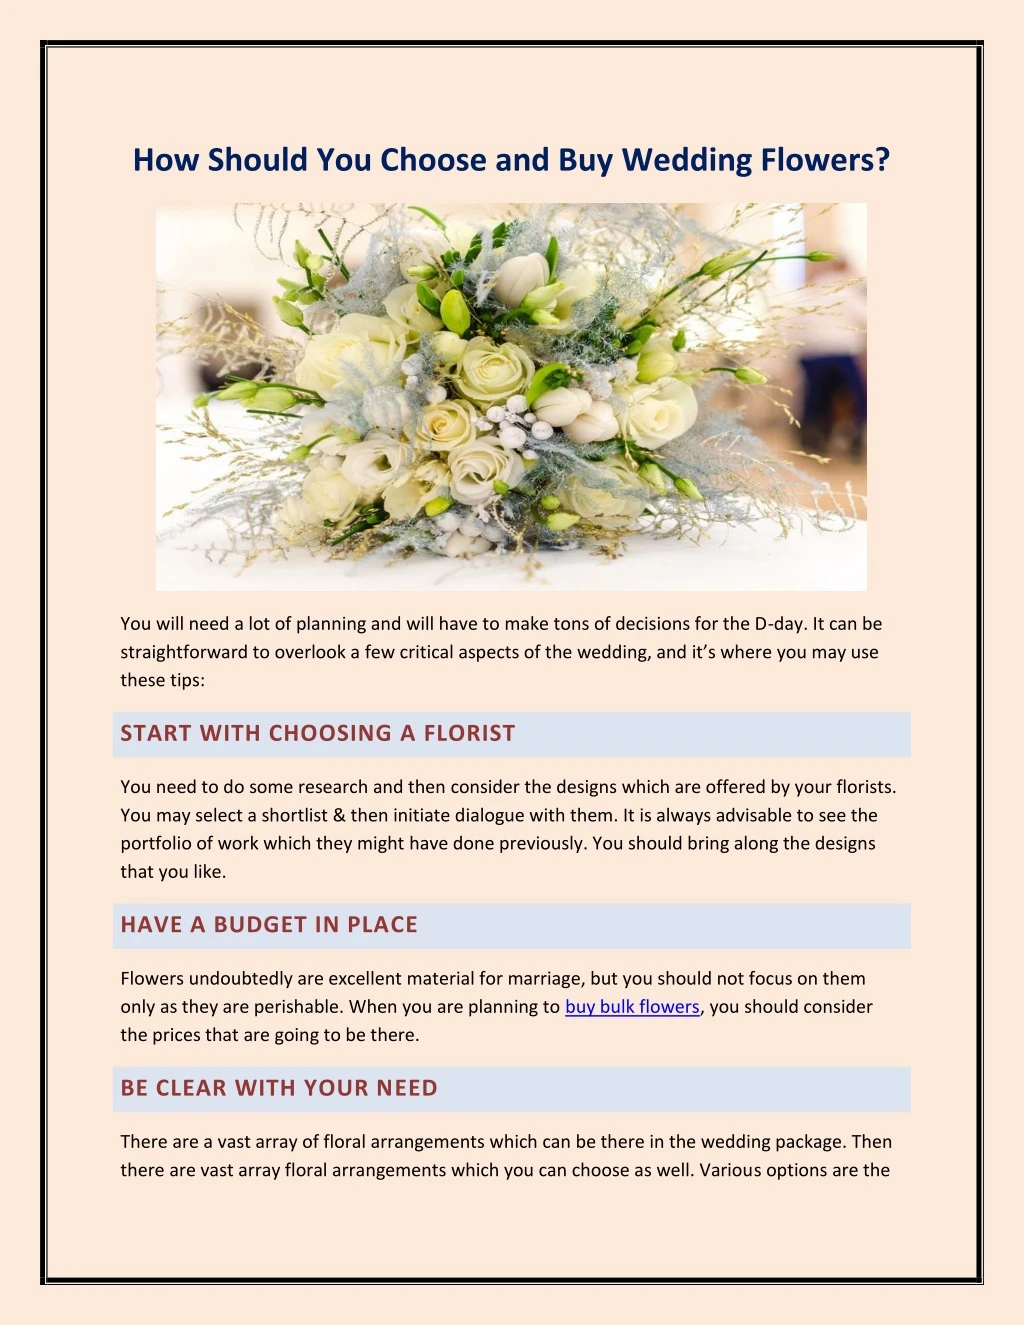 how should you choose and buy wedding flowers